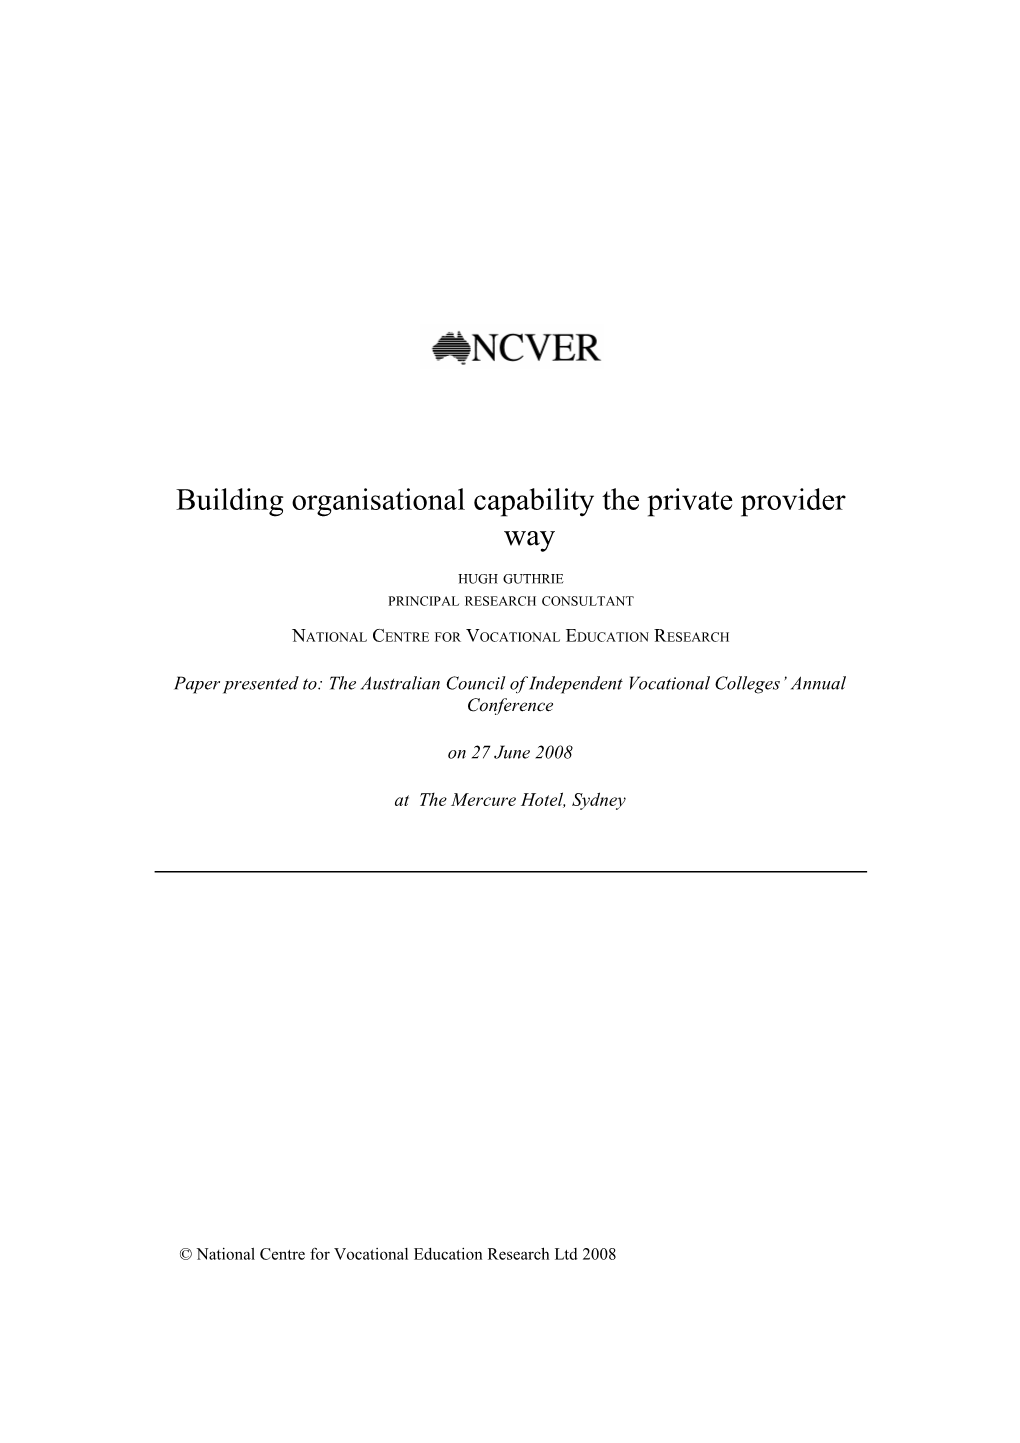 Building Organisational Capability the Private Provider Way